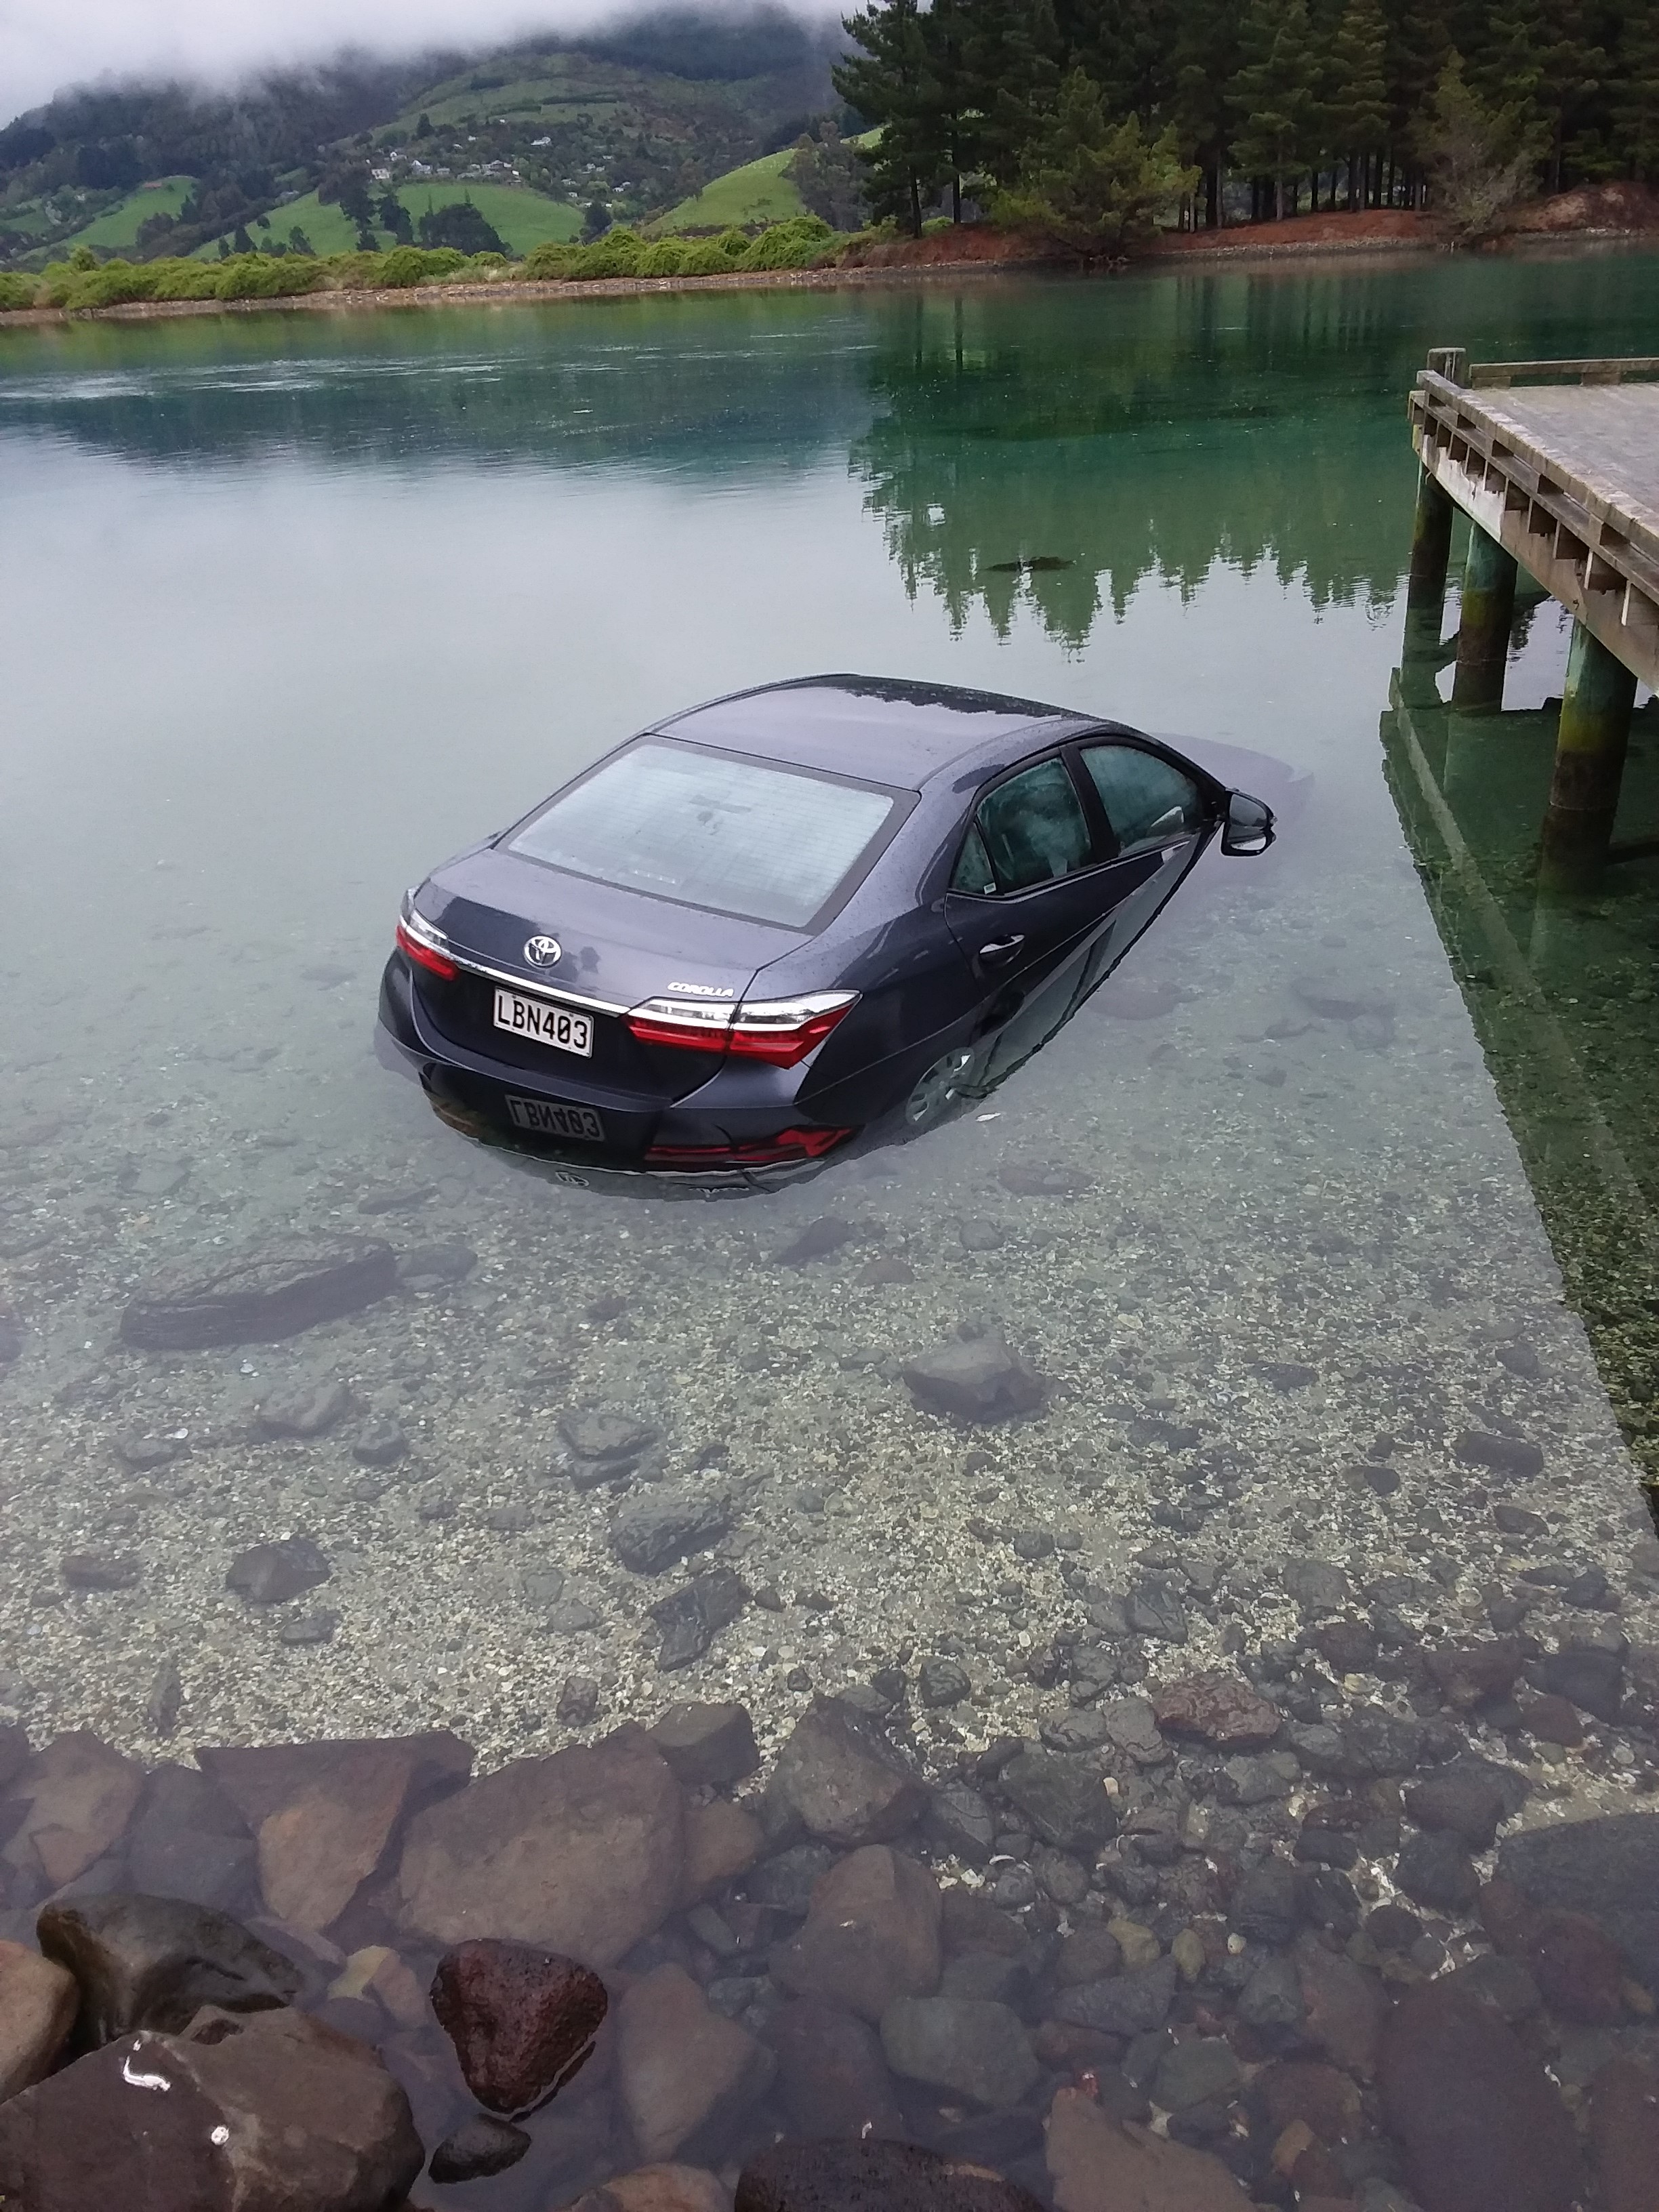 A rental car had to be abandoned after it was driven into the Purakaunui inlet during low tide...